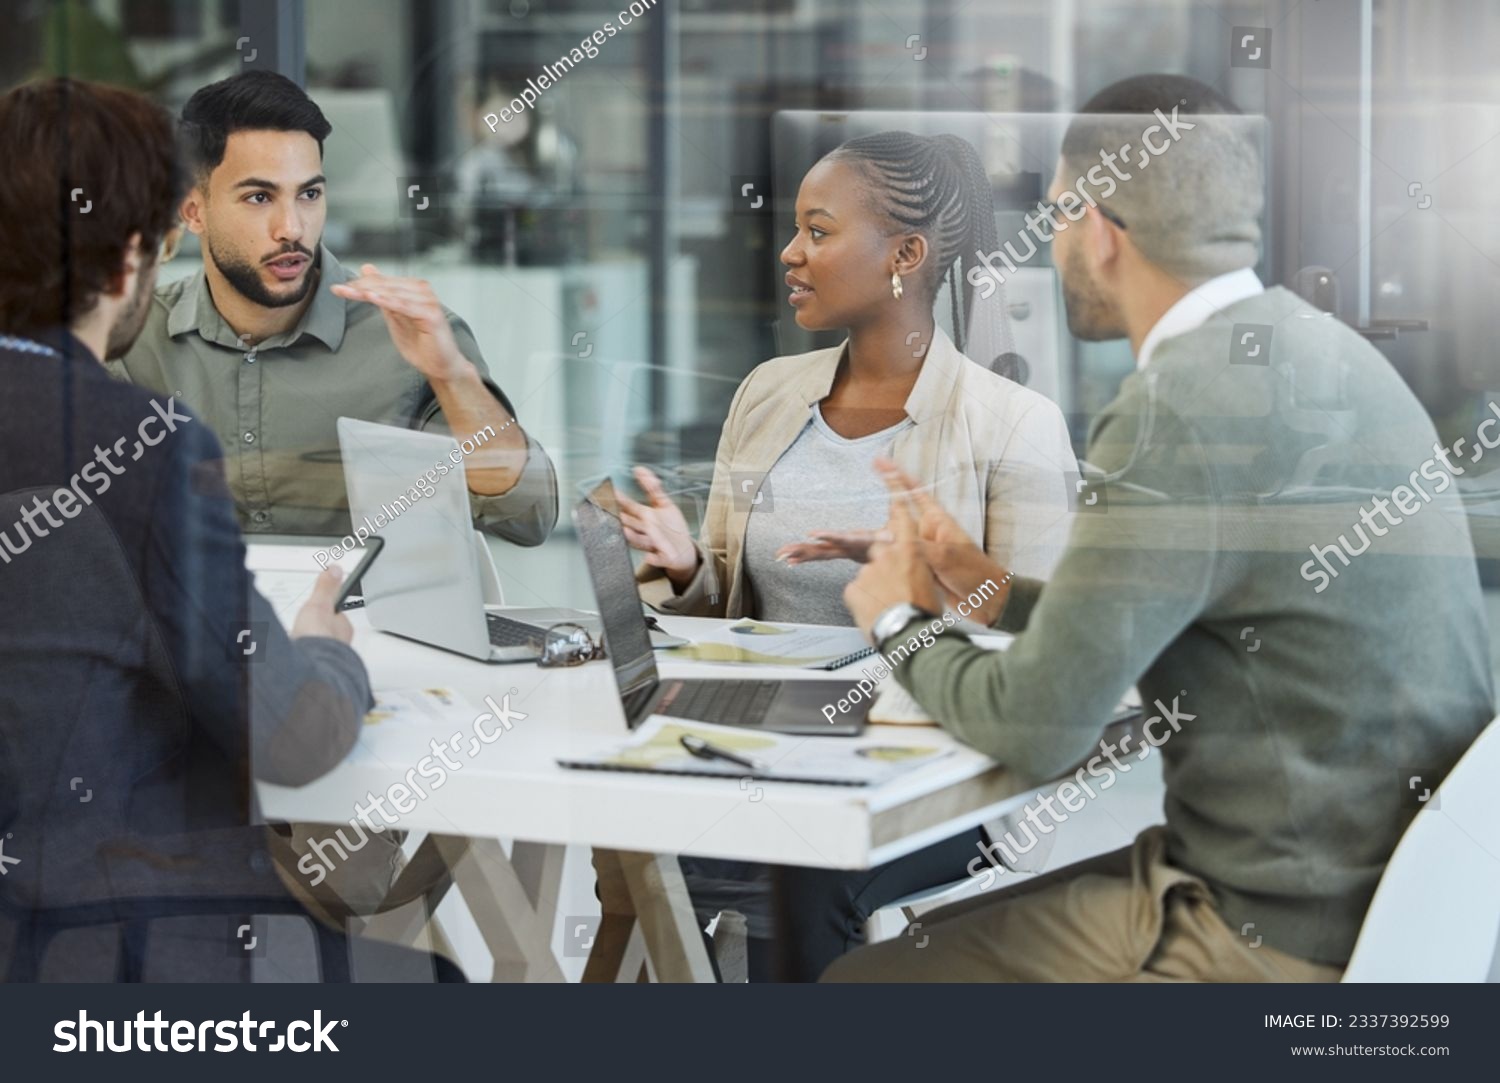 Meeting, collaboration and business people in discussion in the office while working together. Teamwork, planning and group of employees brainstorming with technology for a project in the workplace. #2337392599